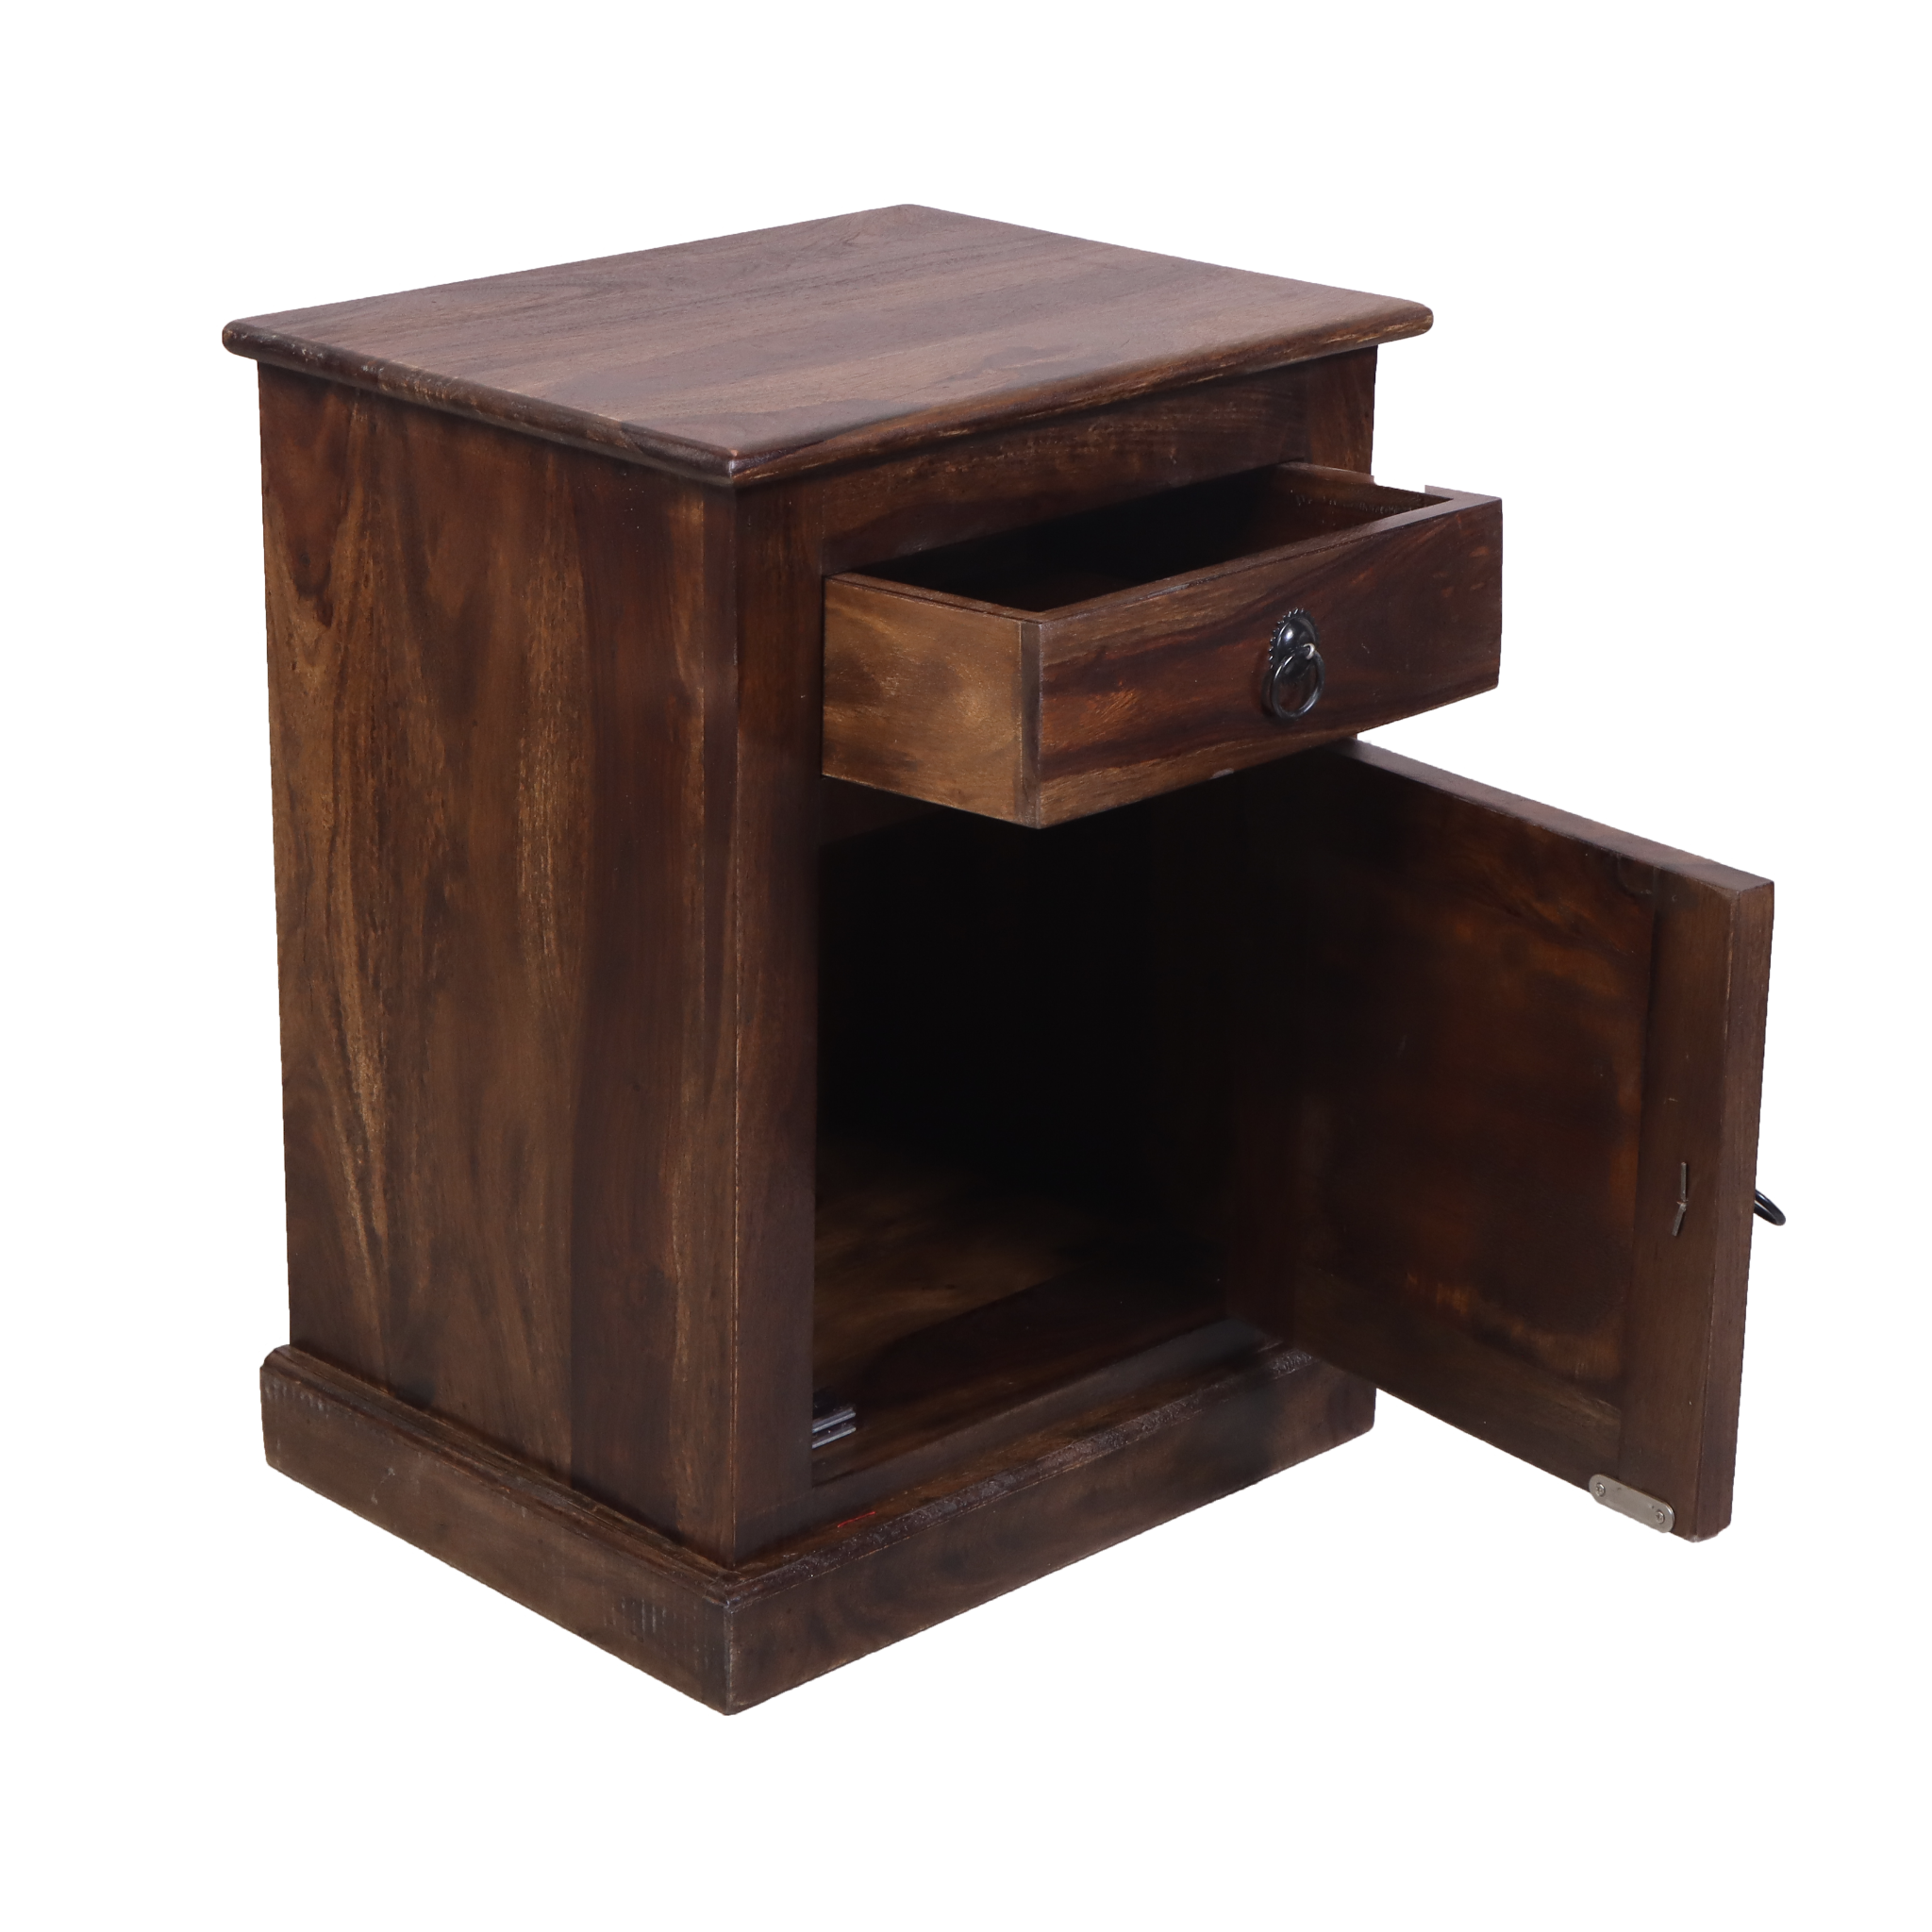 Bakra Bedside Table with One Drawer